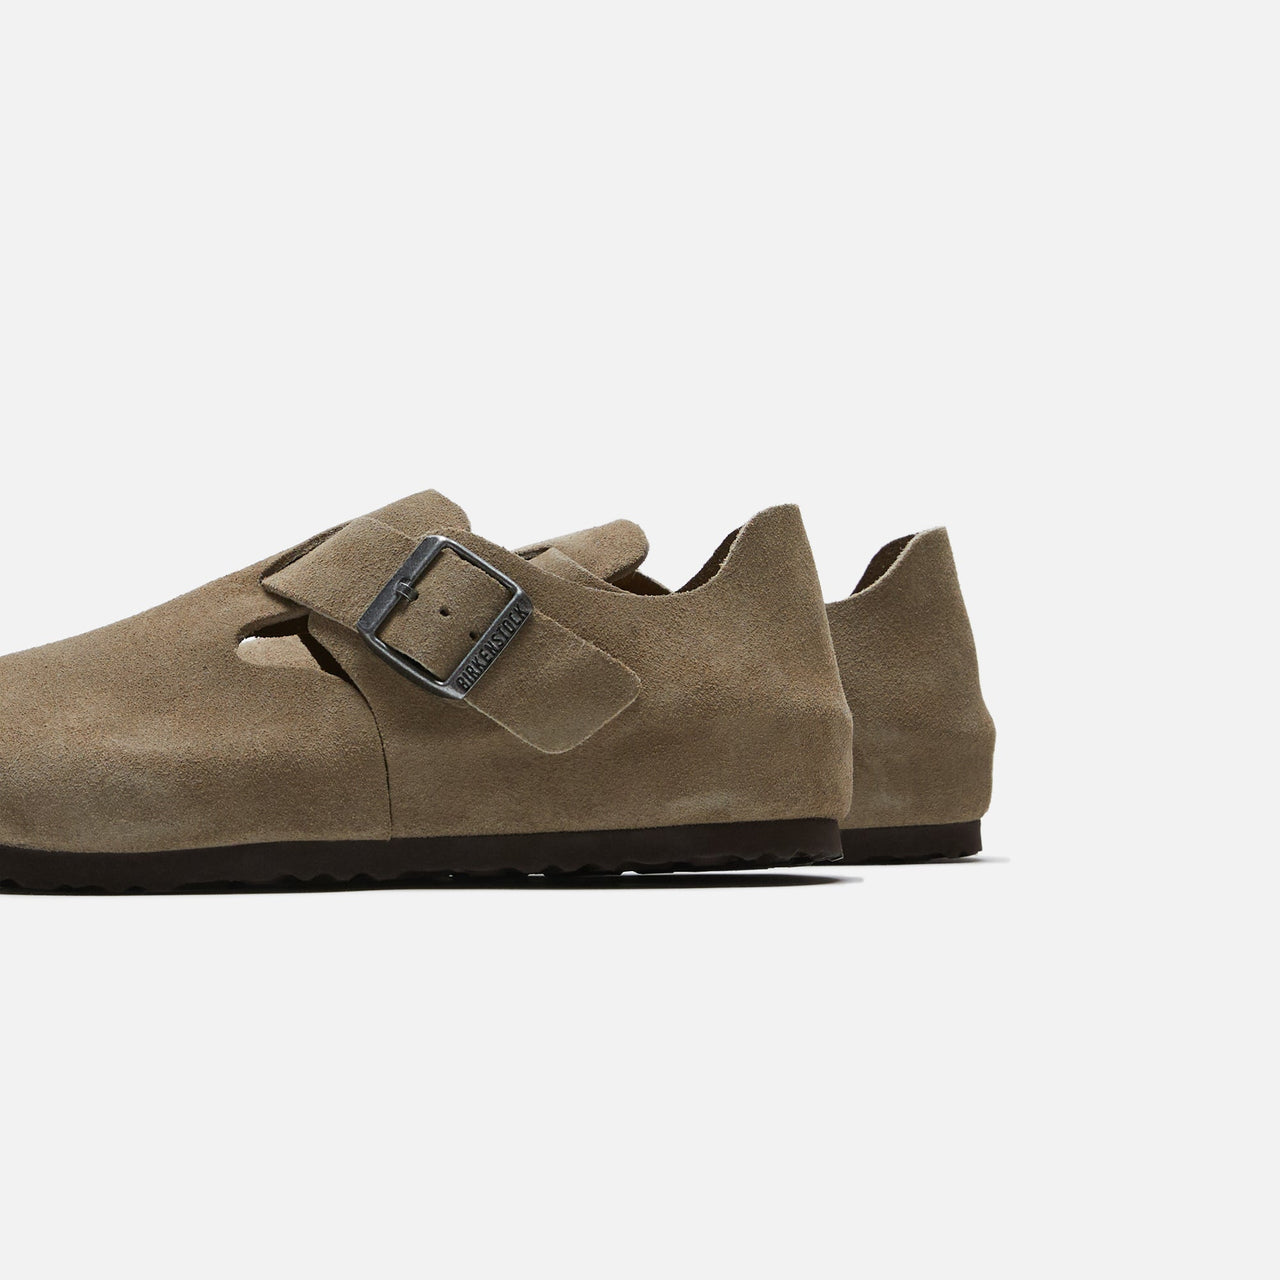 Stylish Birkenstock London Suede Taupe loafers with contoured cork footbed